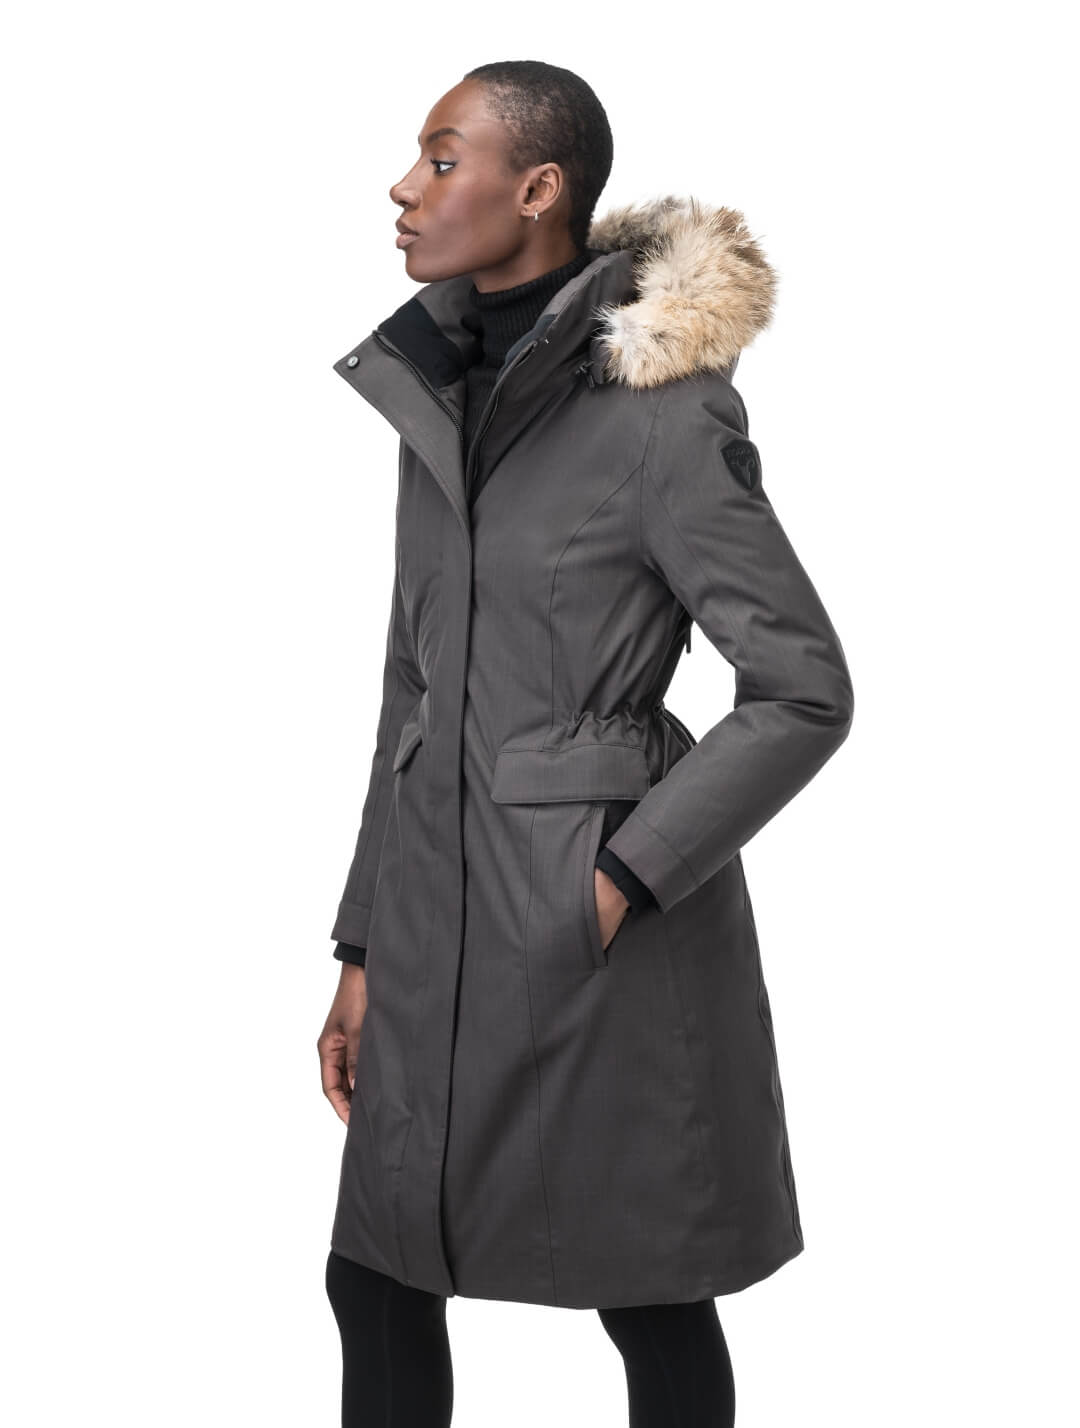 Zenith Ladies Knee Length Parka in knee length, Canadian duck down insulation, removable hood with removable fur ruff trim, and two-way front zipper, in Steel Grey